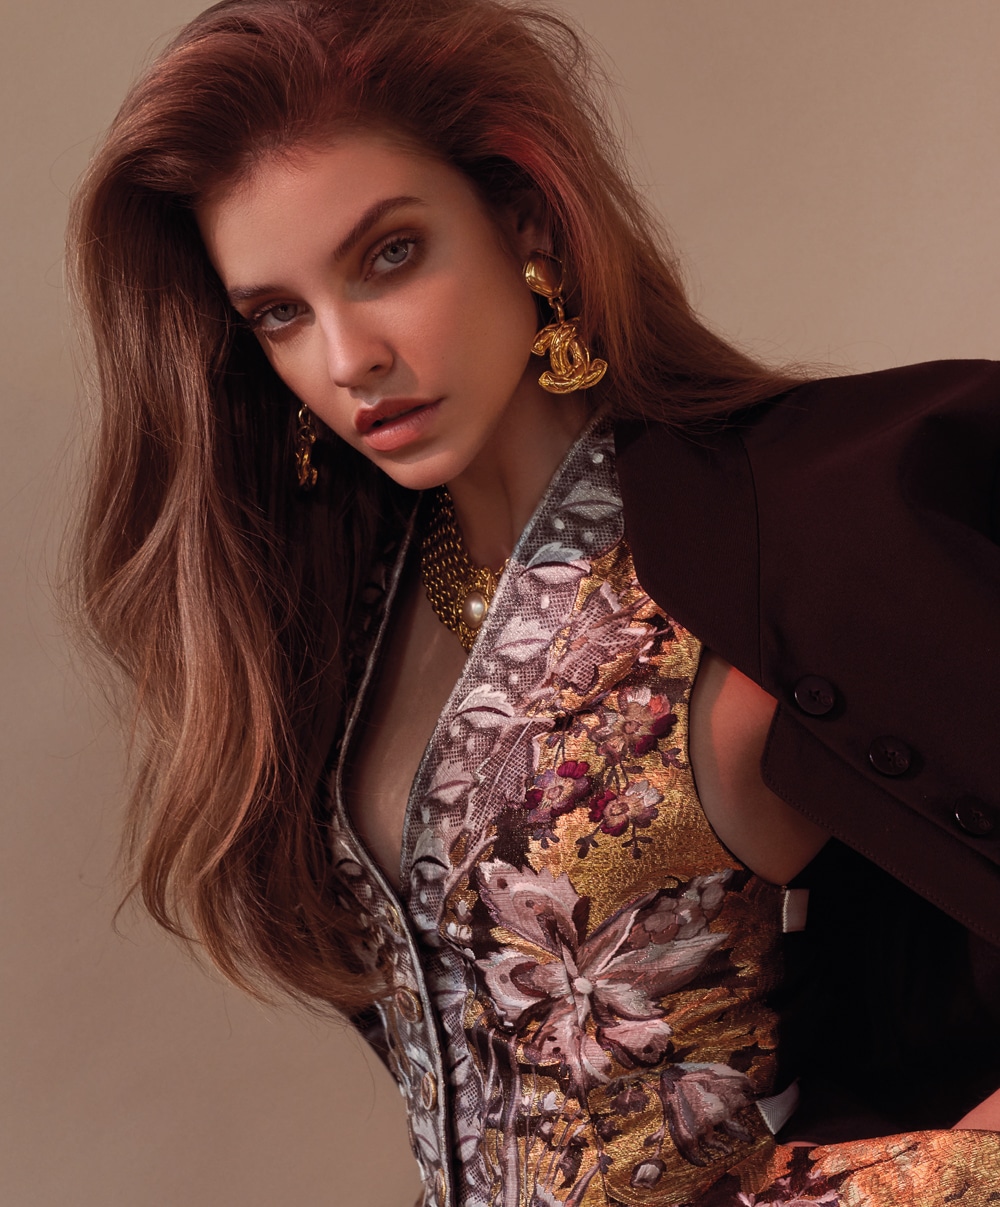 Andreas Ortner for Vogue Portugal with Barbara Palvin